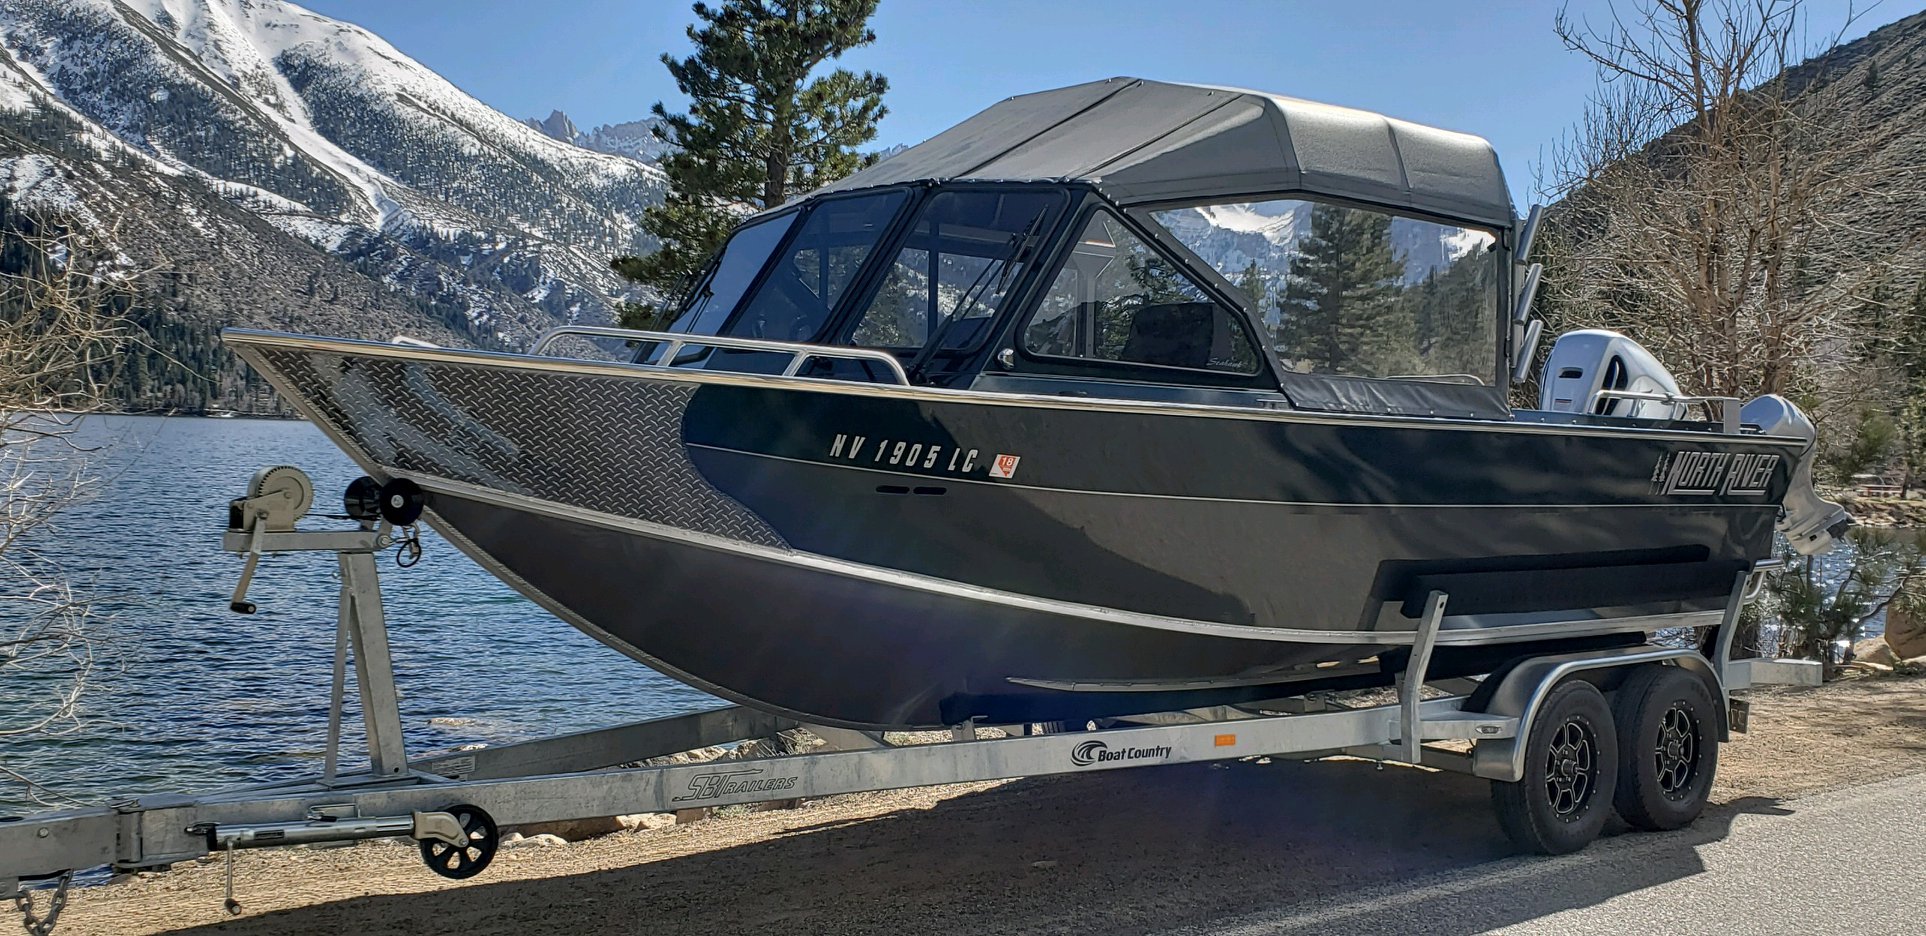 2018 North River Seahawk is Here - Eastern Sierra Guiding Service